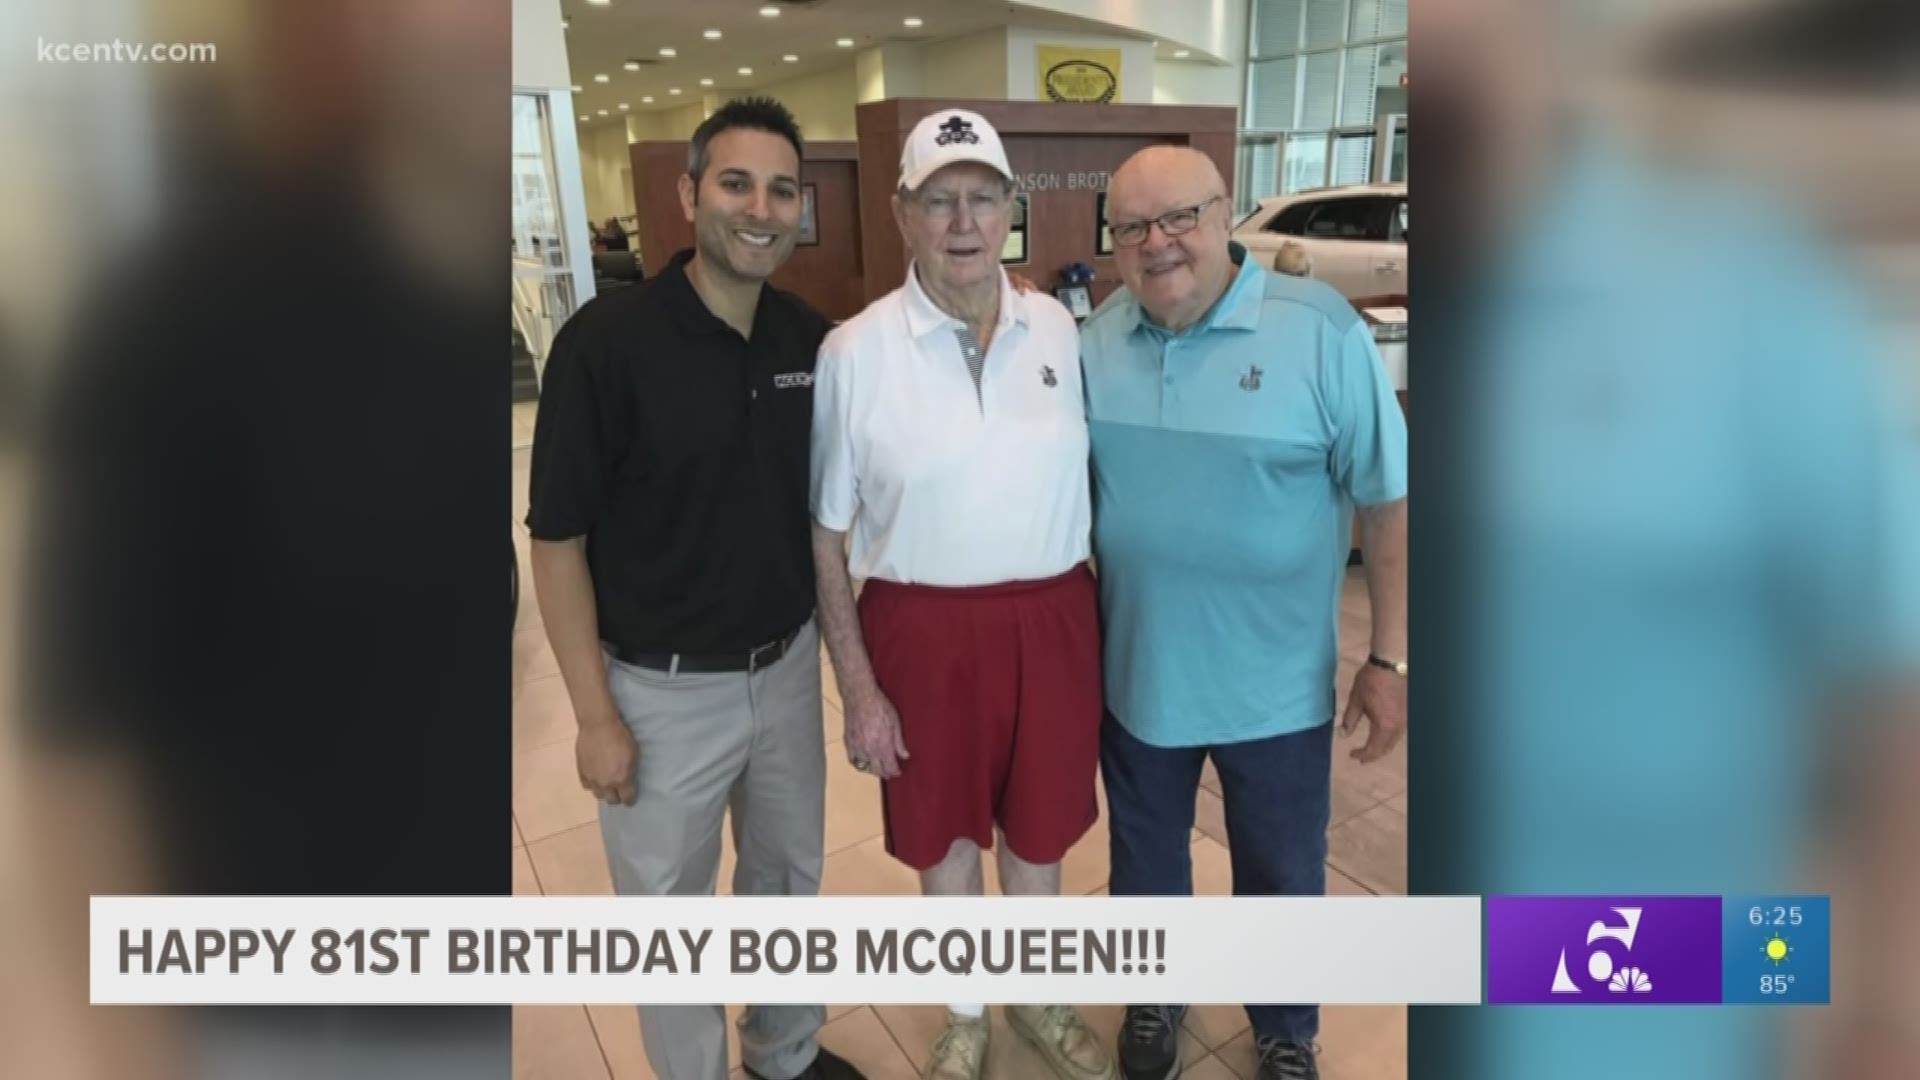 Former Temple High School head football coach Bob McQueen turned 81 on Monday. McQueen had 24 winning season, 14 district titles and two state championships during his coaching career at Temple.